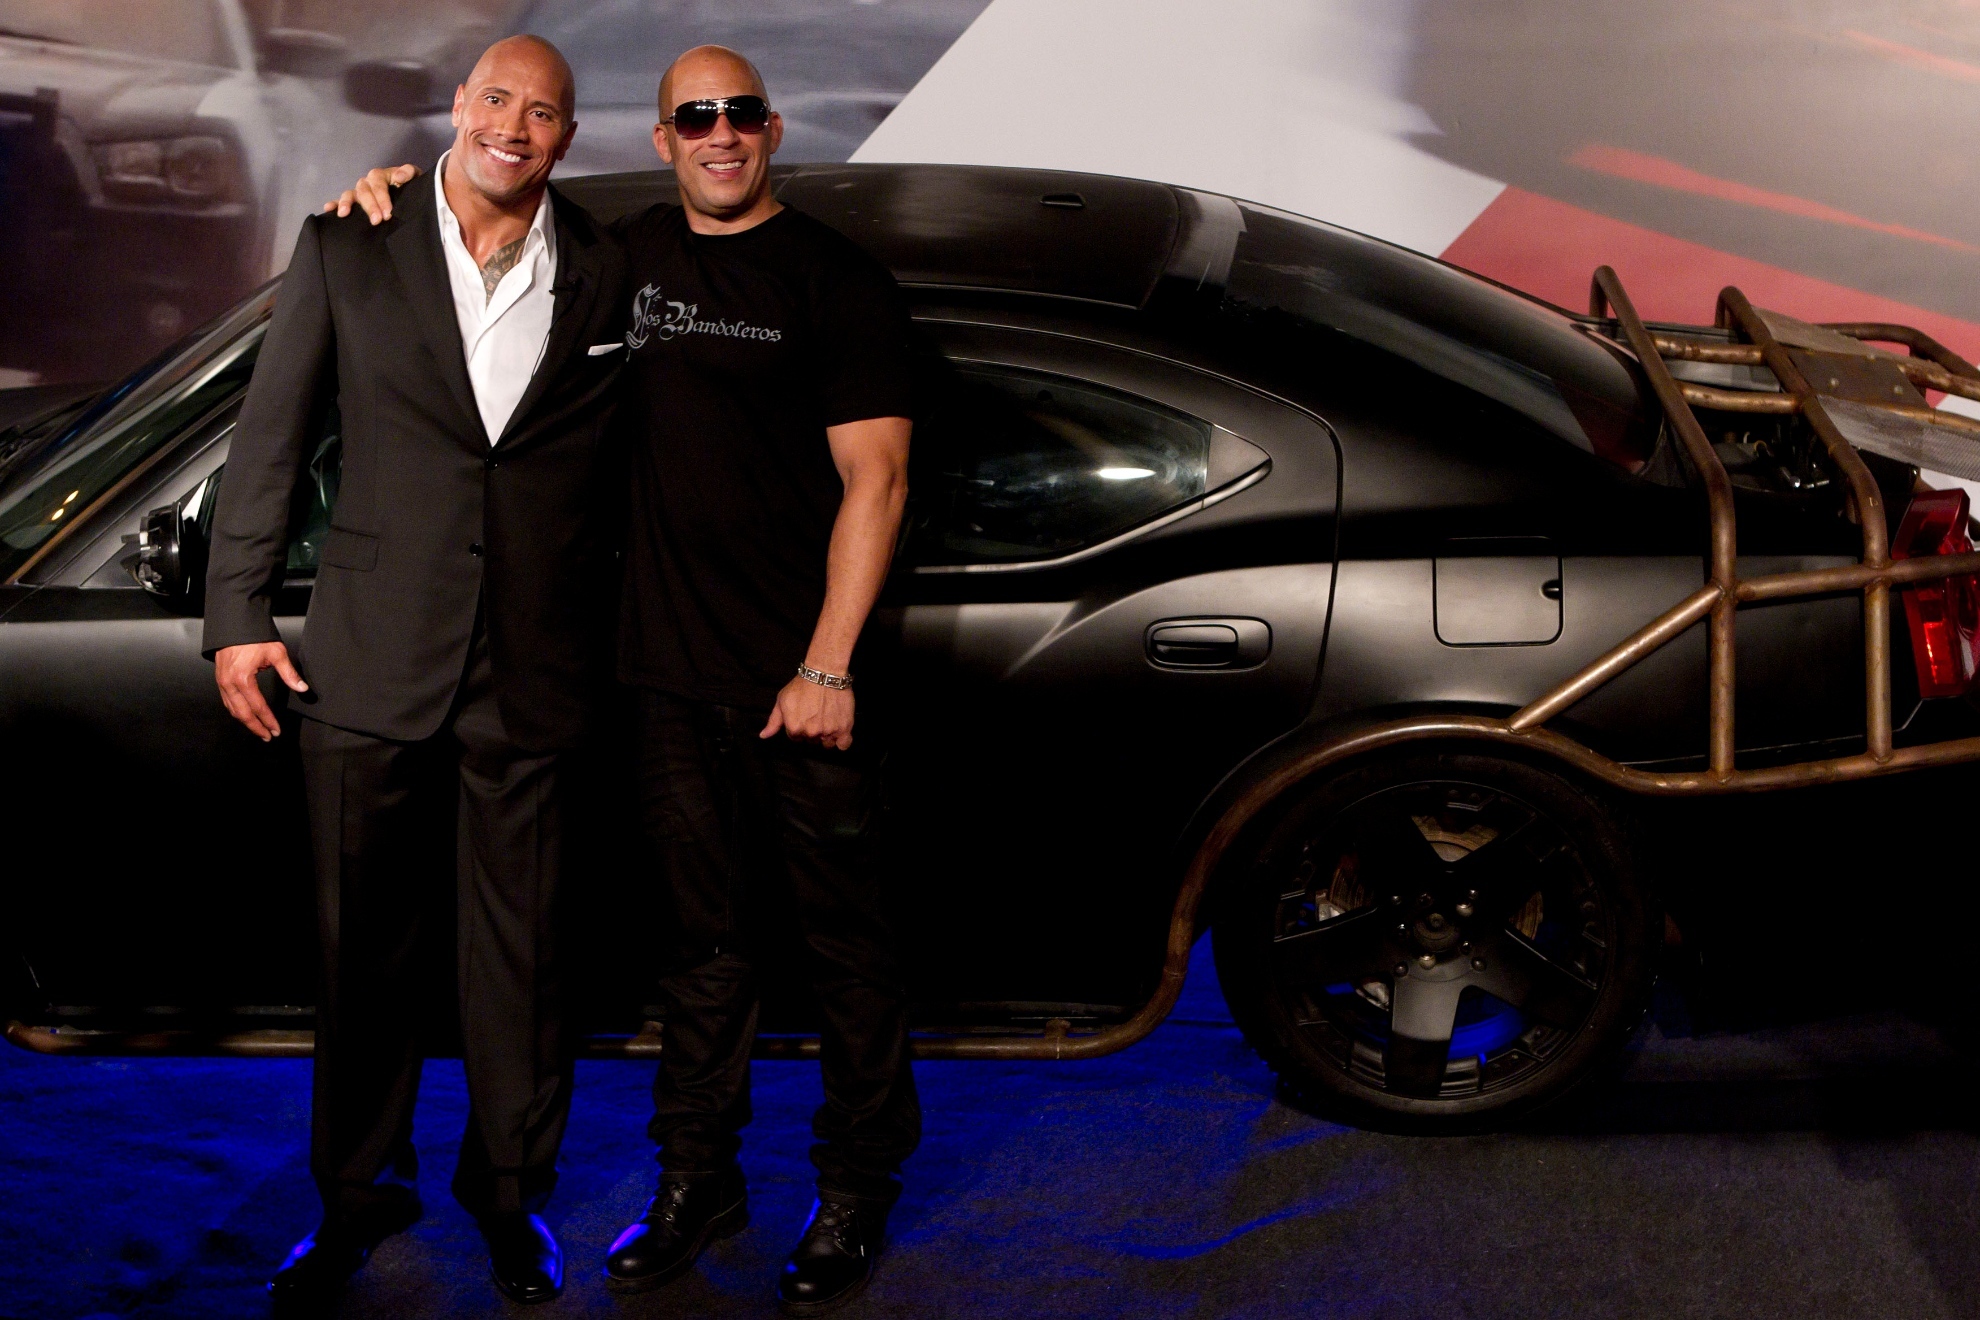 Image of Dwayne Johnson and Vin Diesel at a Fast 8 Premiere